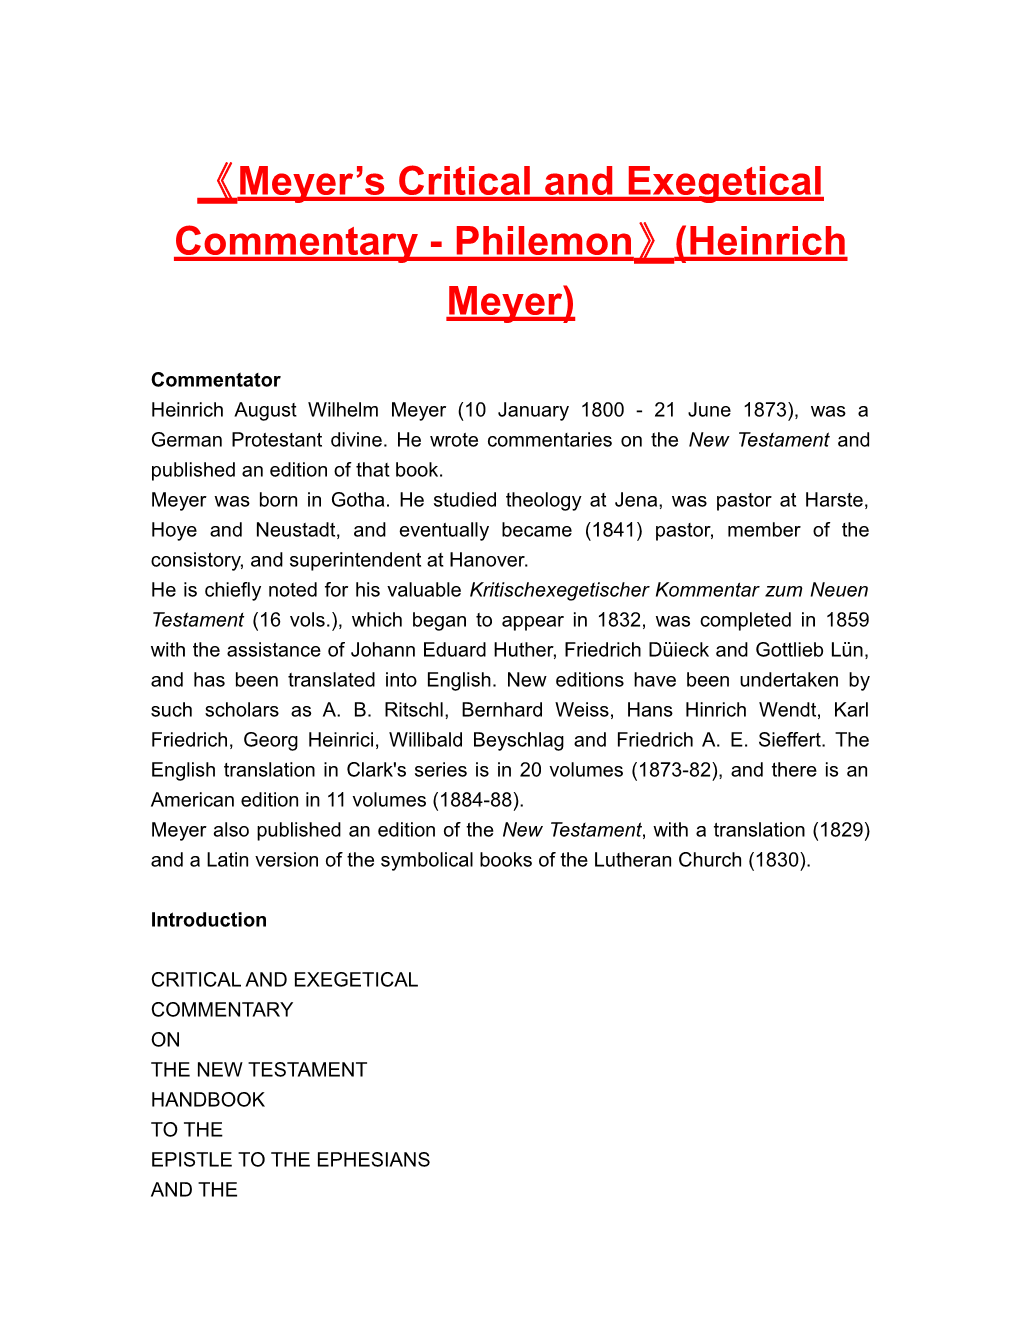 Meyer S Critical and Exegetical Commentary-Philemon (Heinrichmeyer)